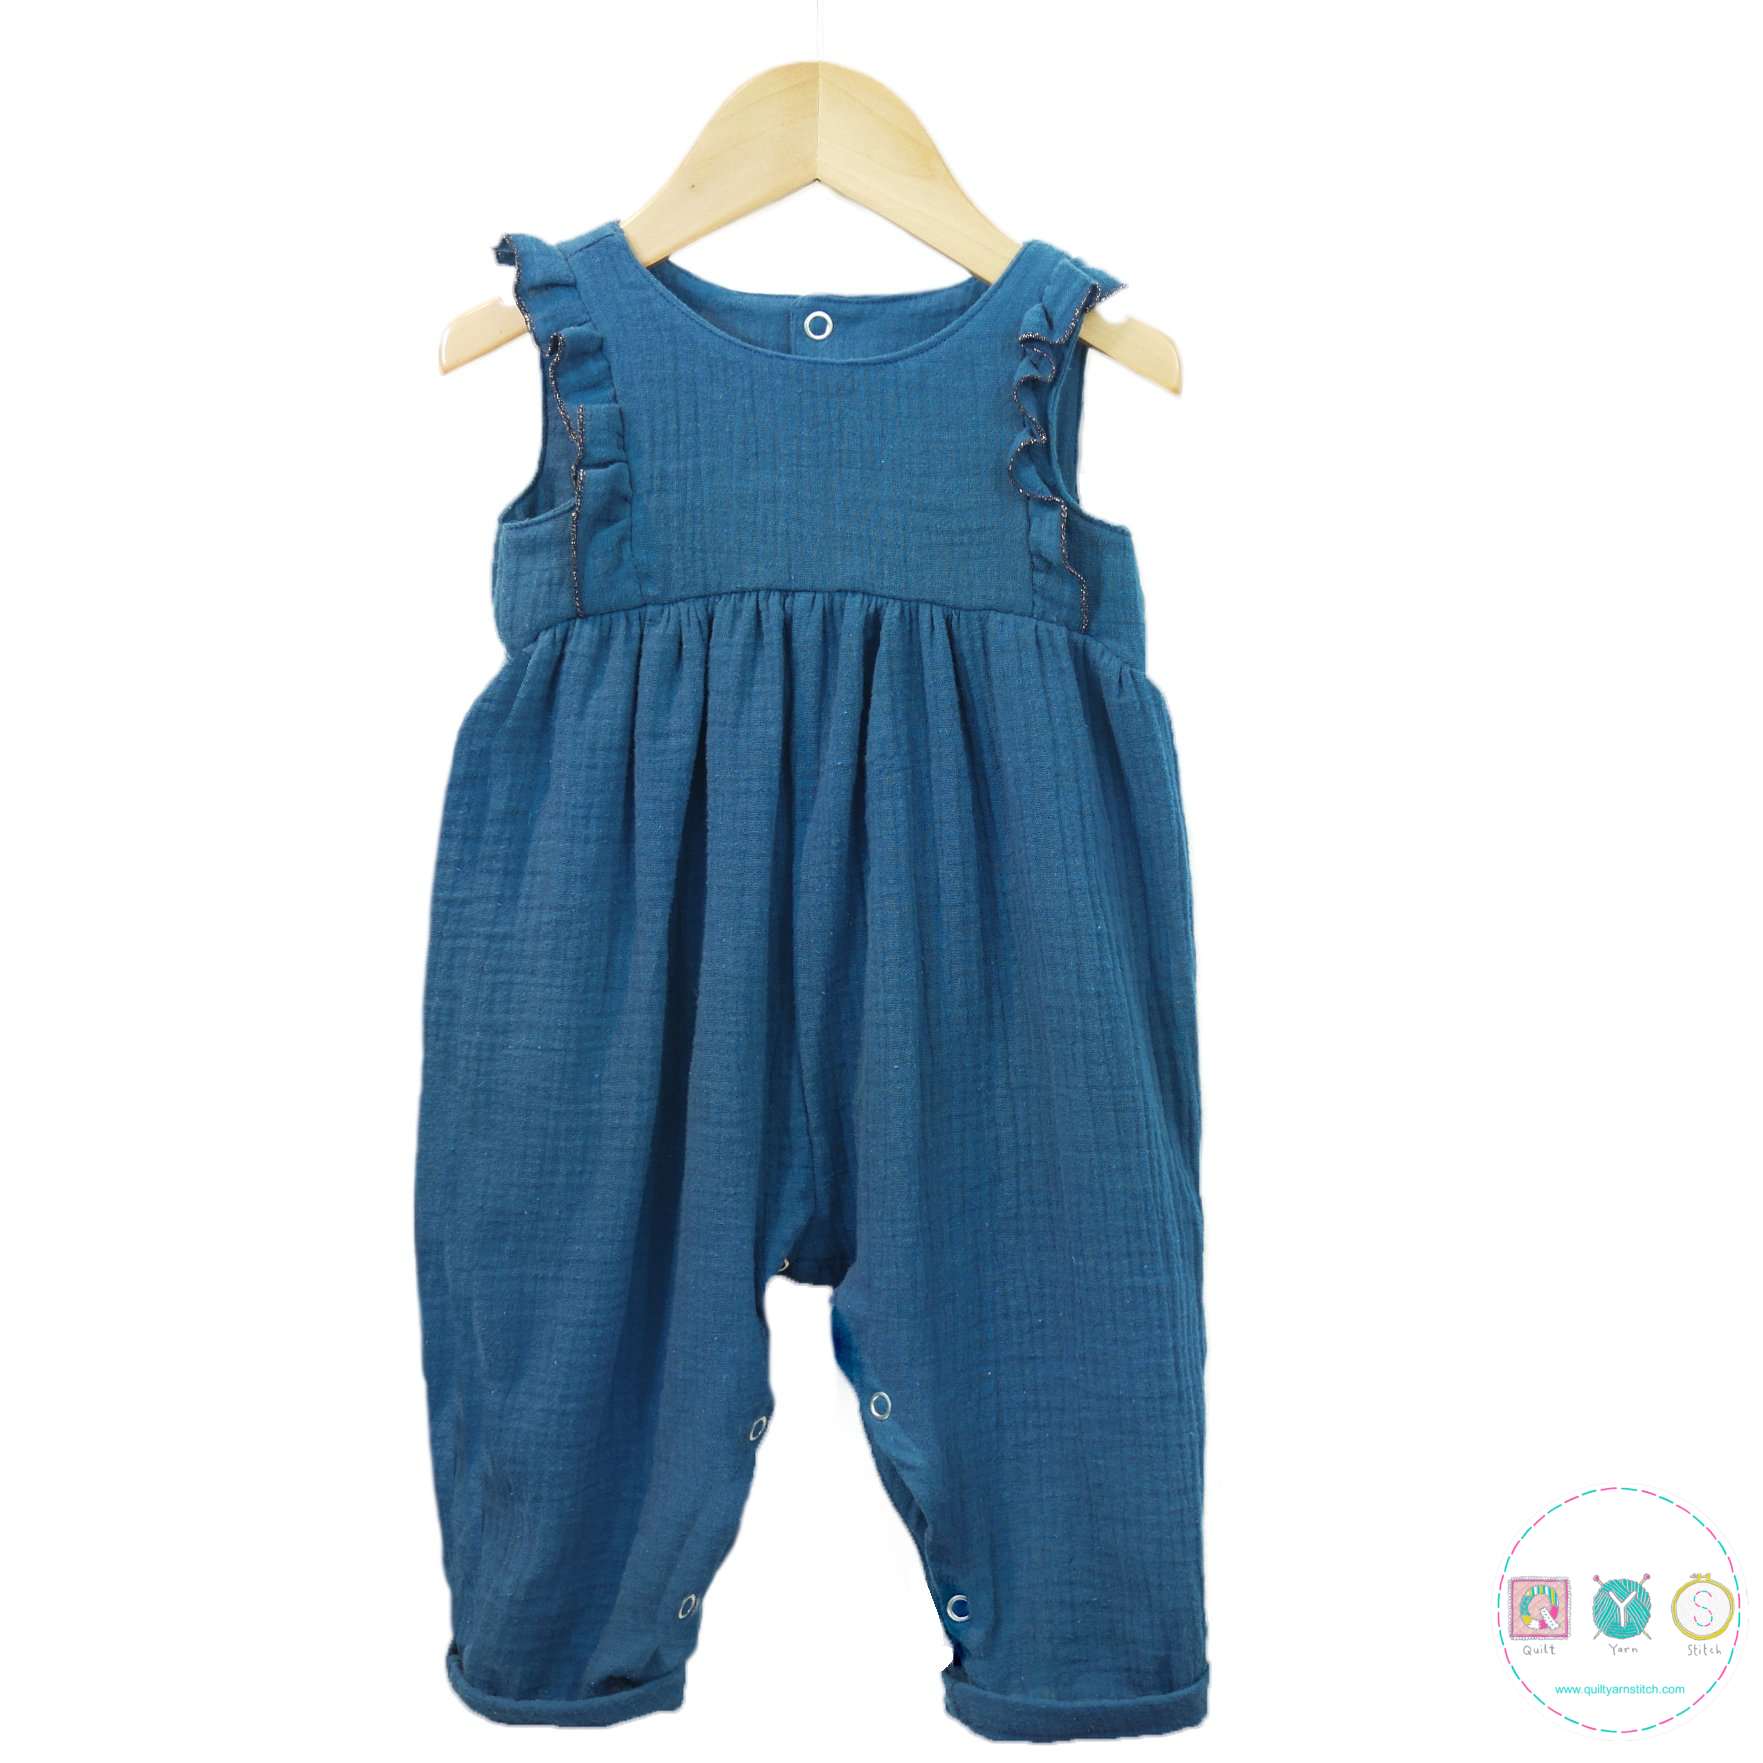 Ikatee - Madrid Jumpsuit - French Sewing Patterns for Kids - Childrens Dressmaking